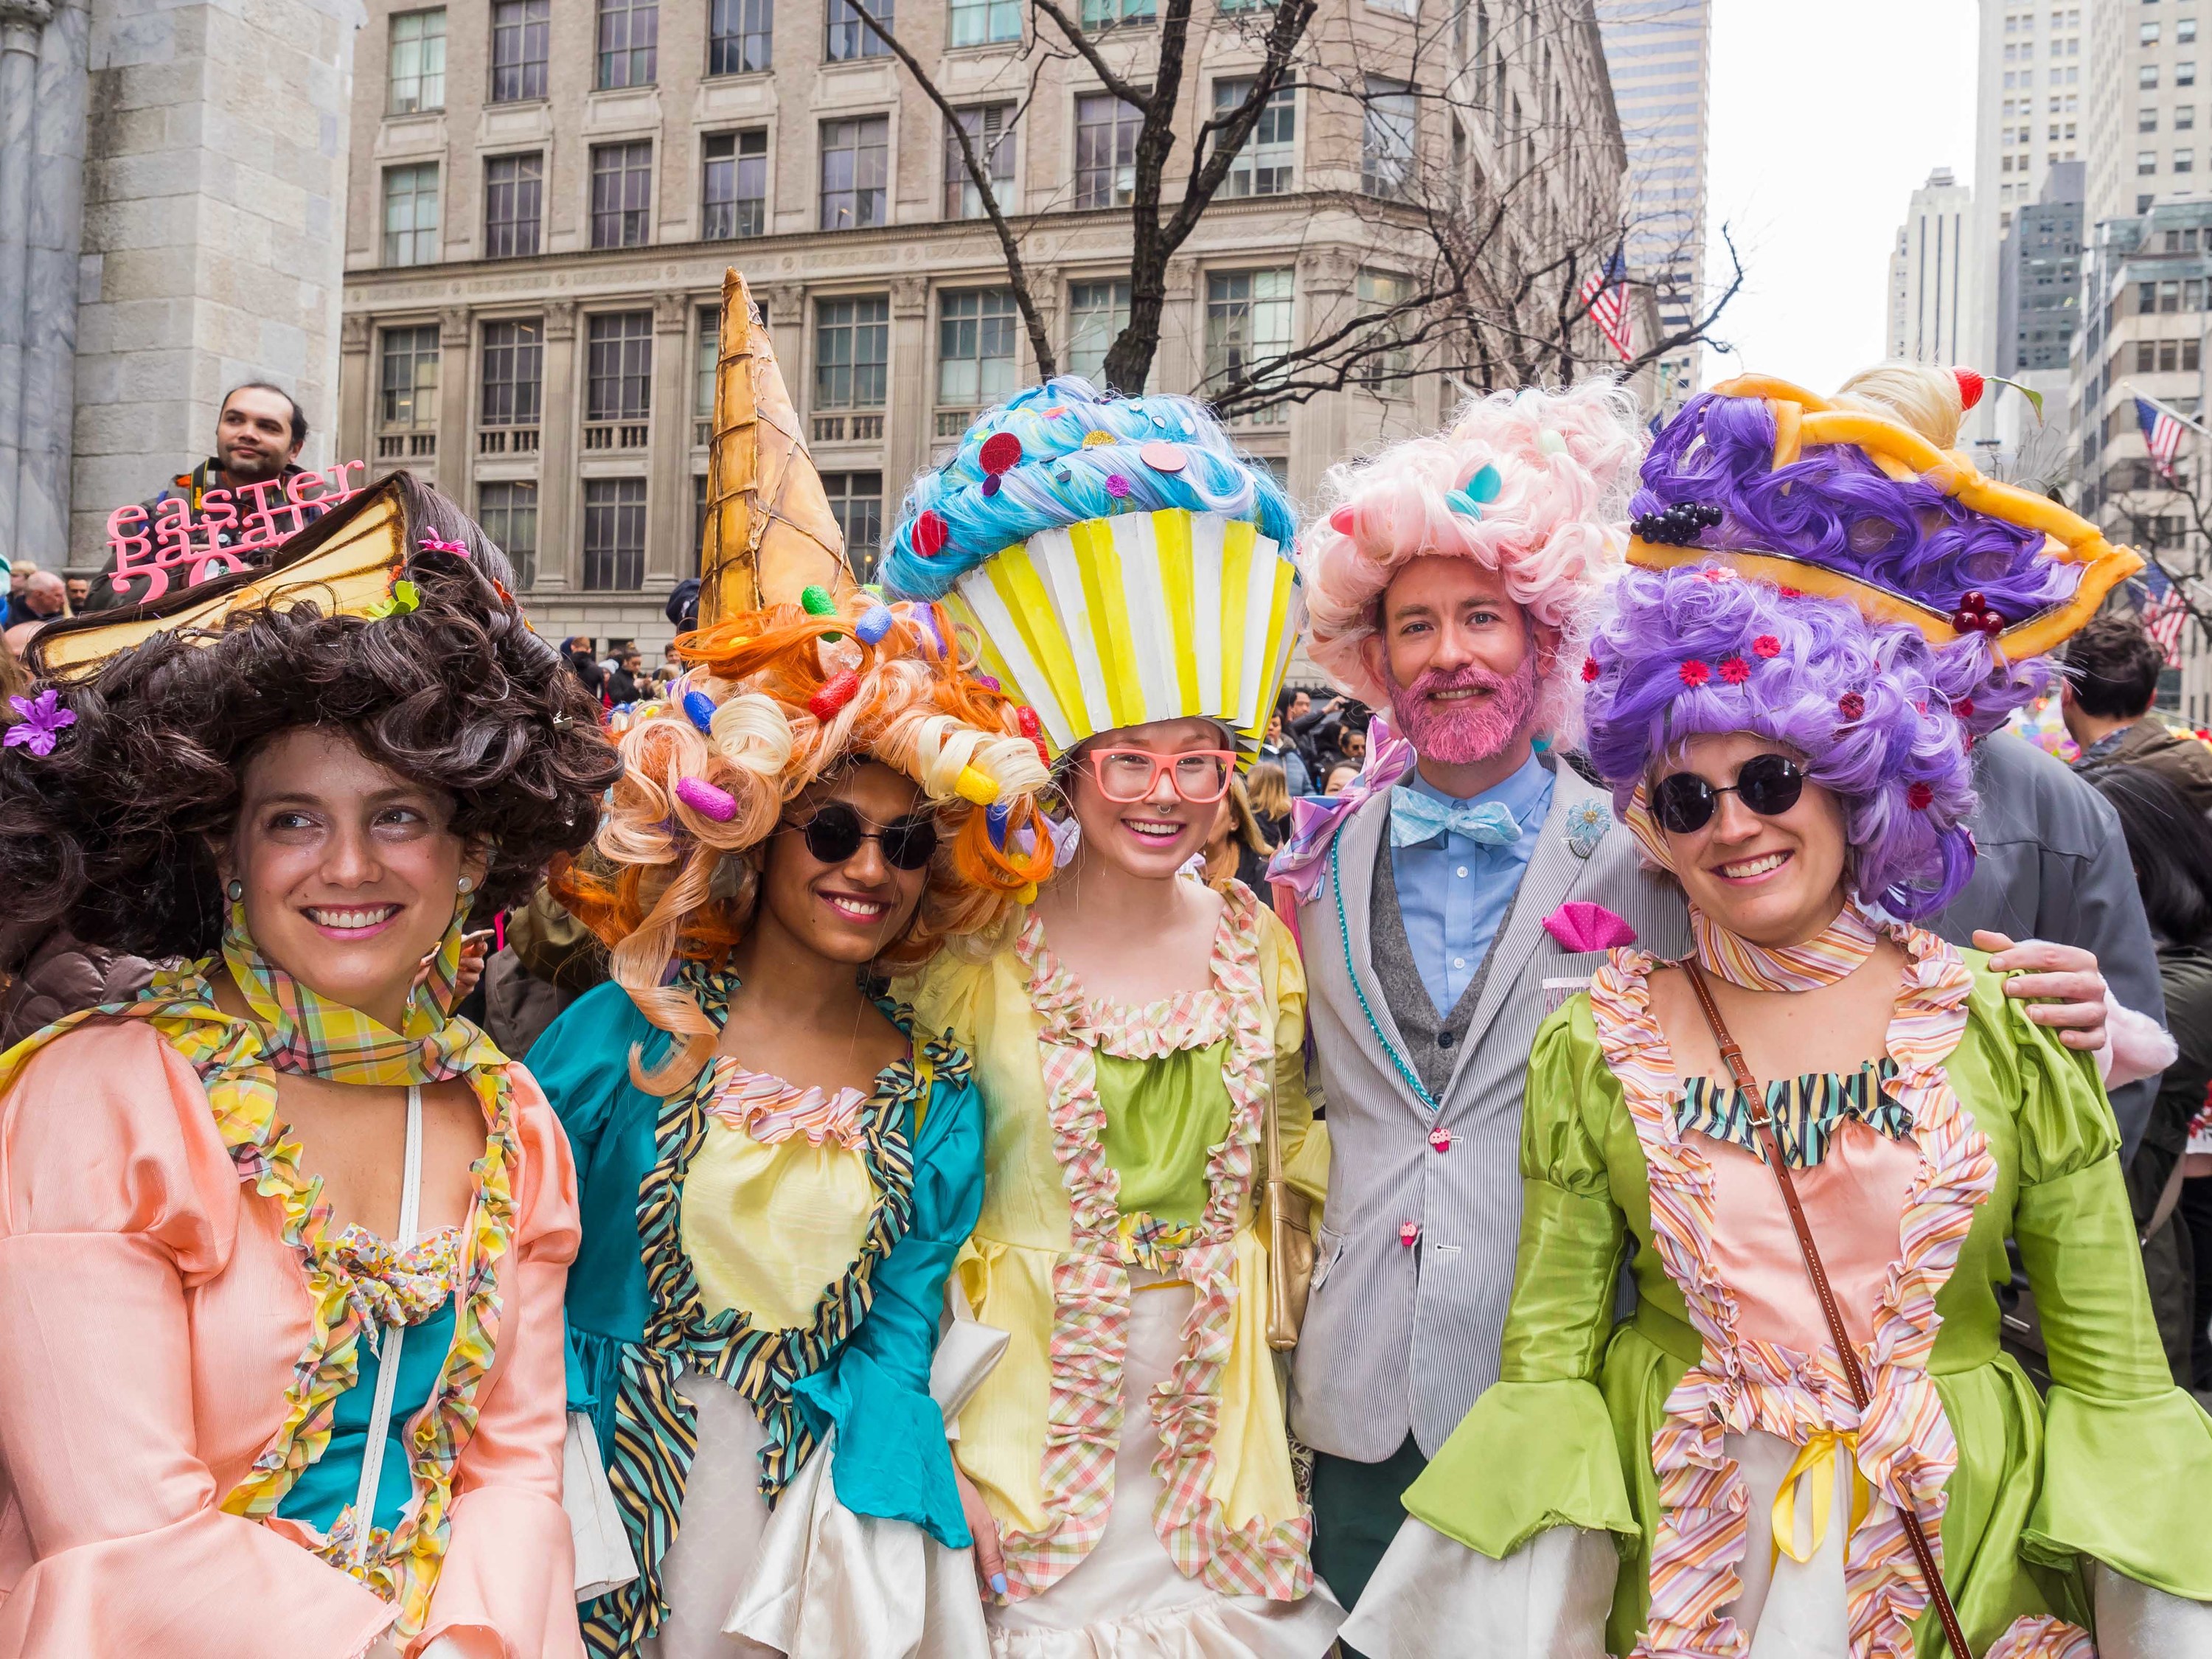 New York’s famous Easter parade is moving online this year